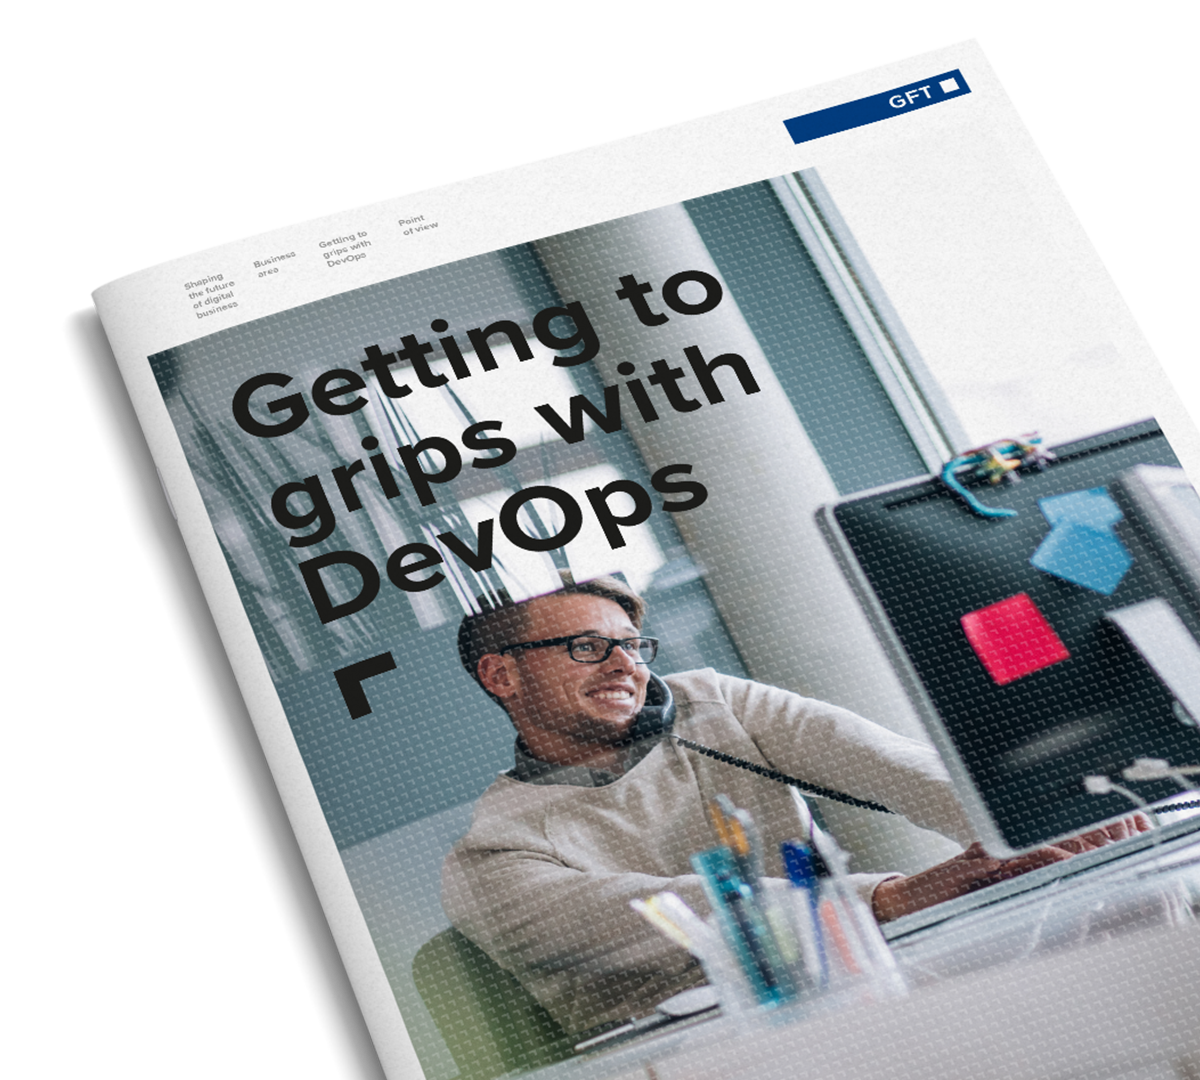 Learn how DevOps is the catalyst for software transformation that improves your services and how you deliver them.